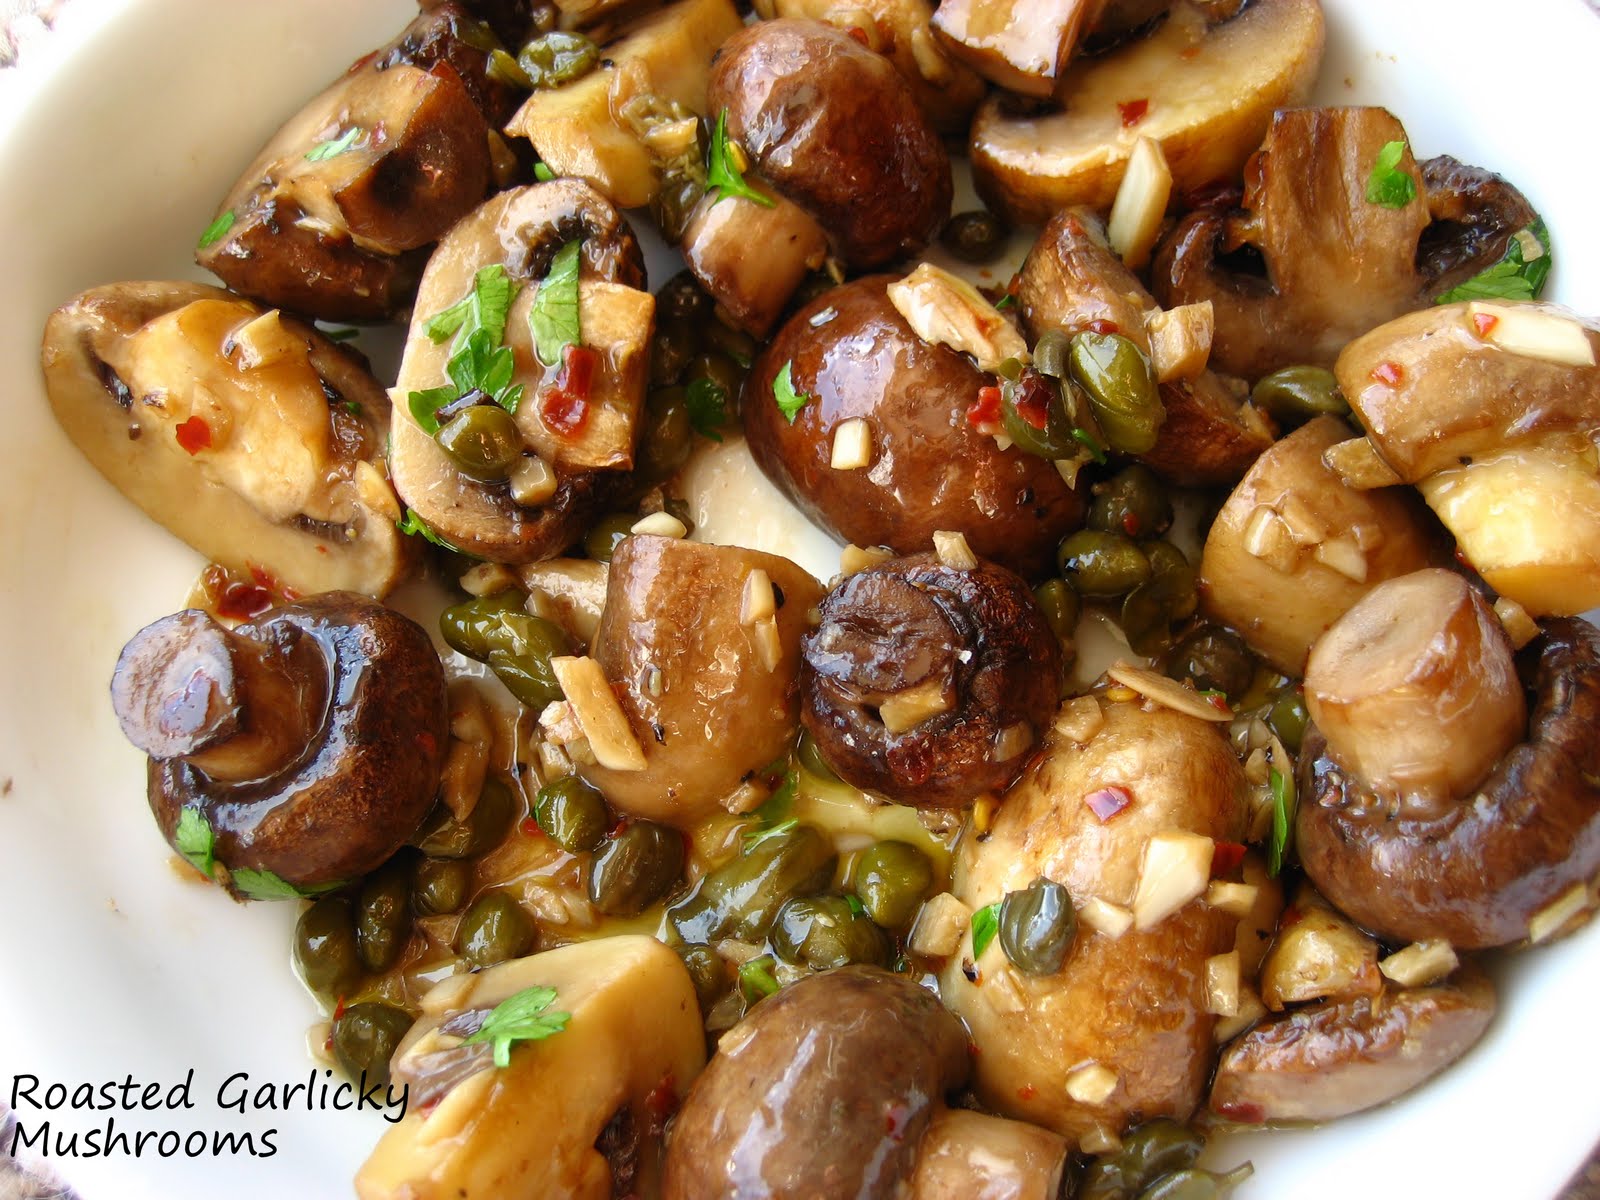 Home Cooking In Montana: Garlic and Butter Roasted Mushrooms with ...